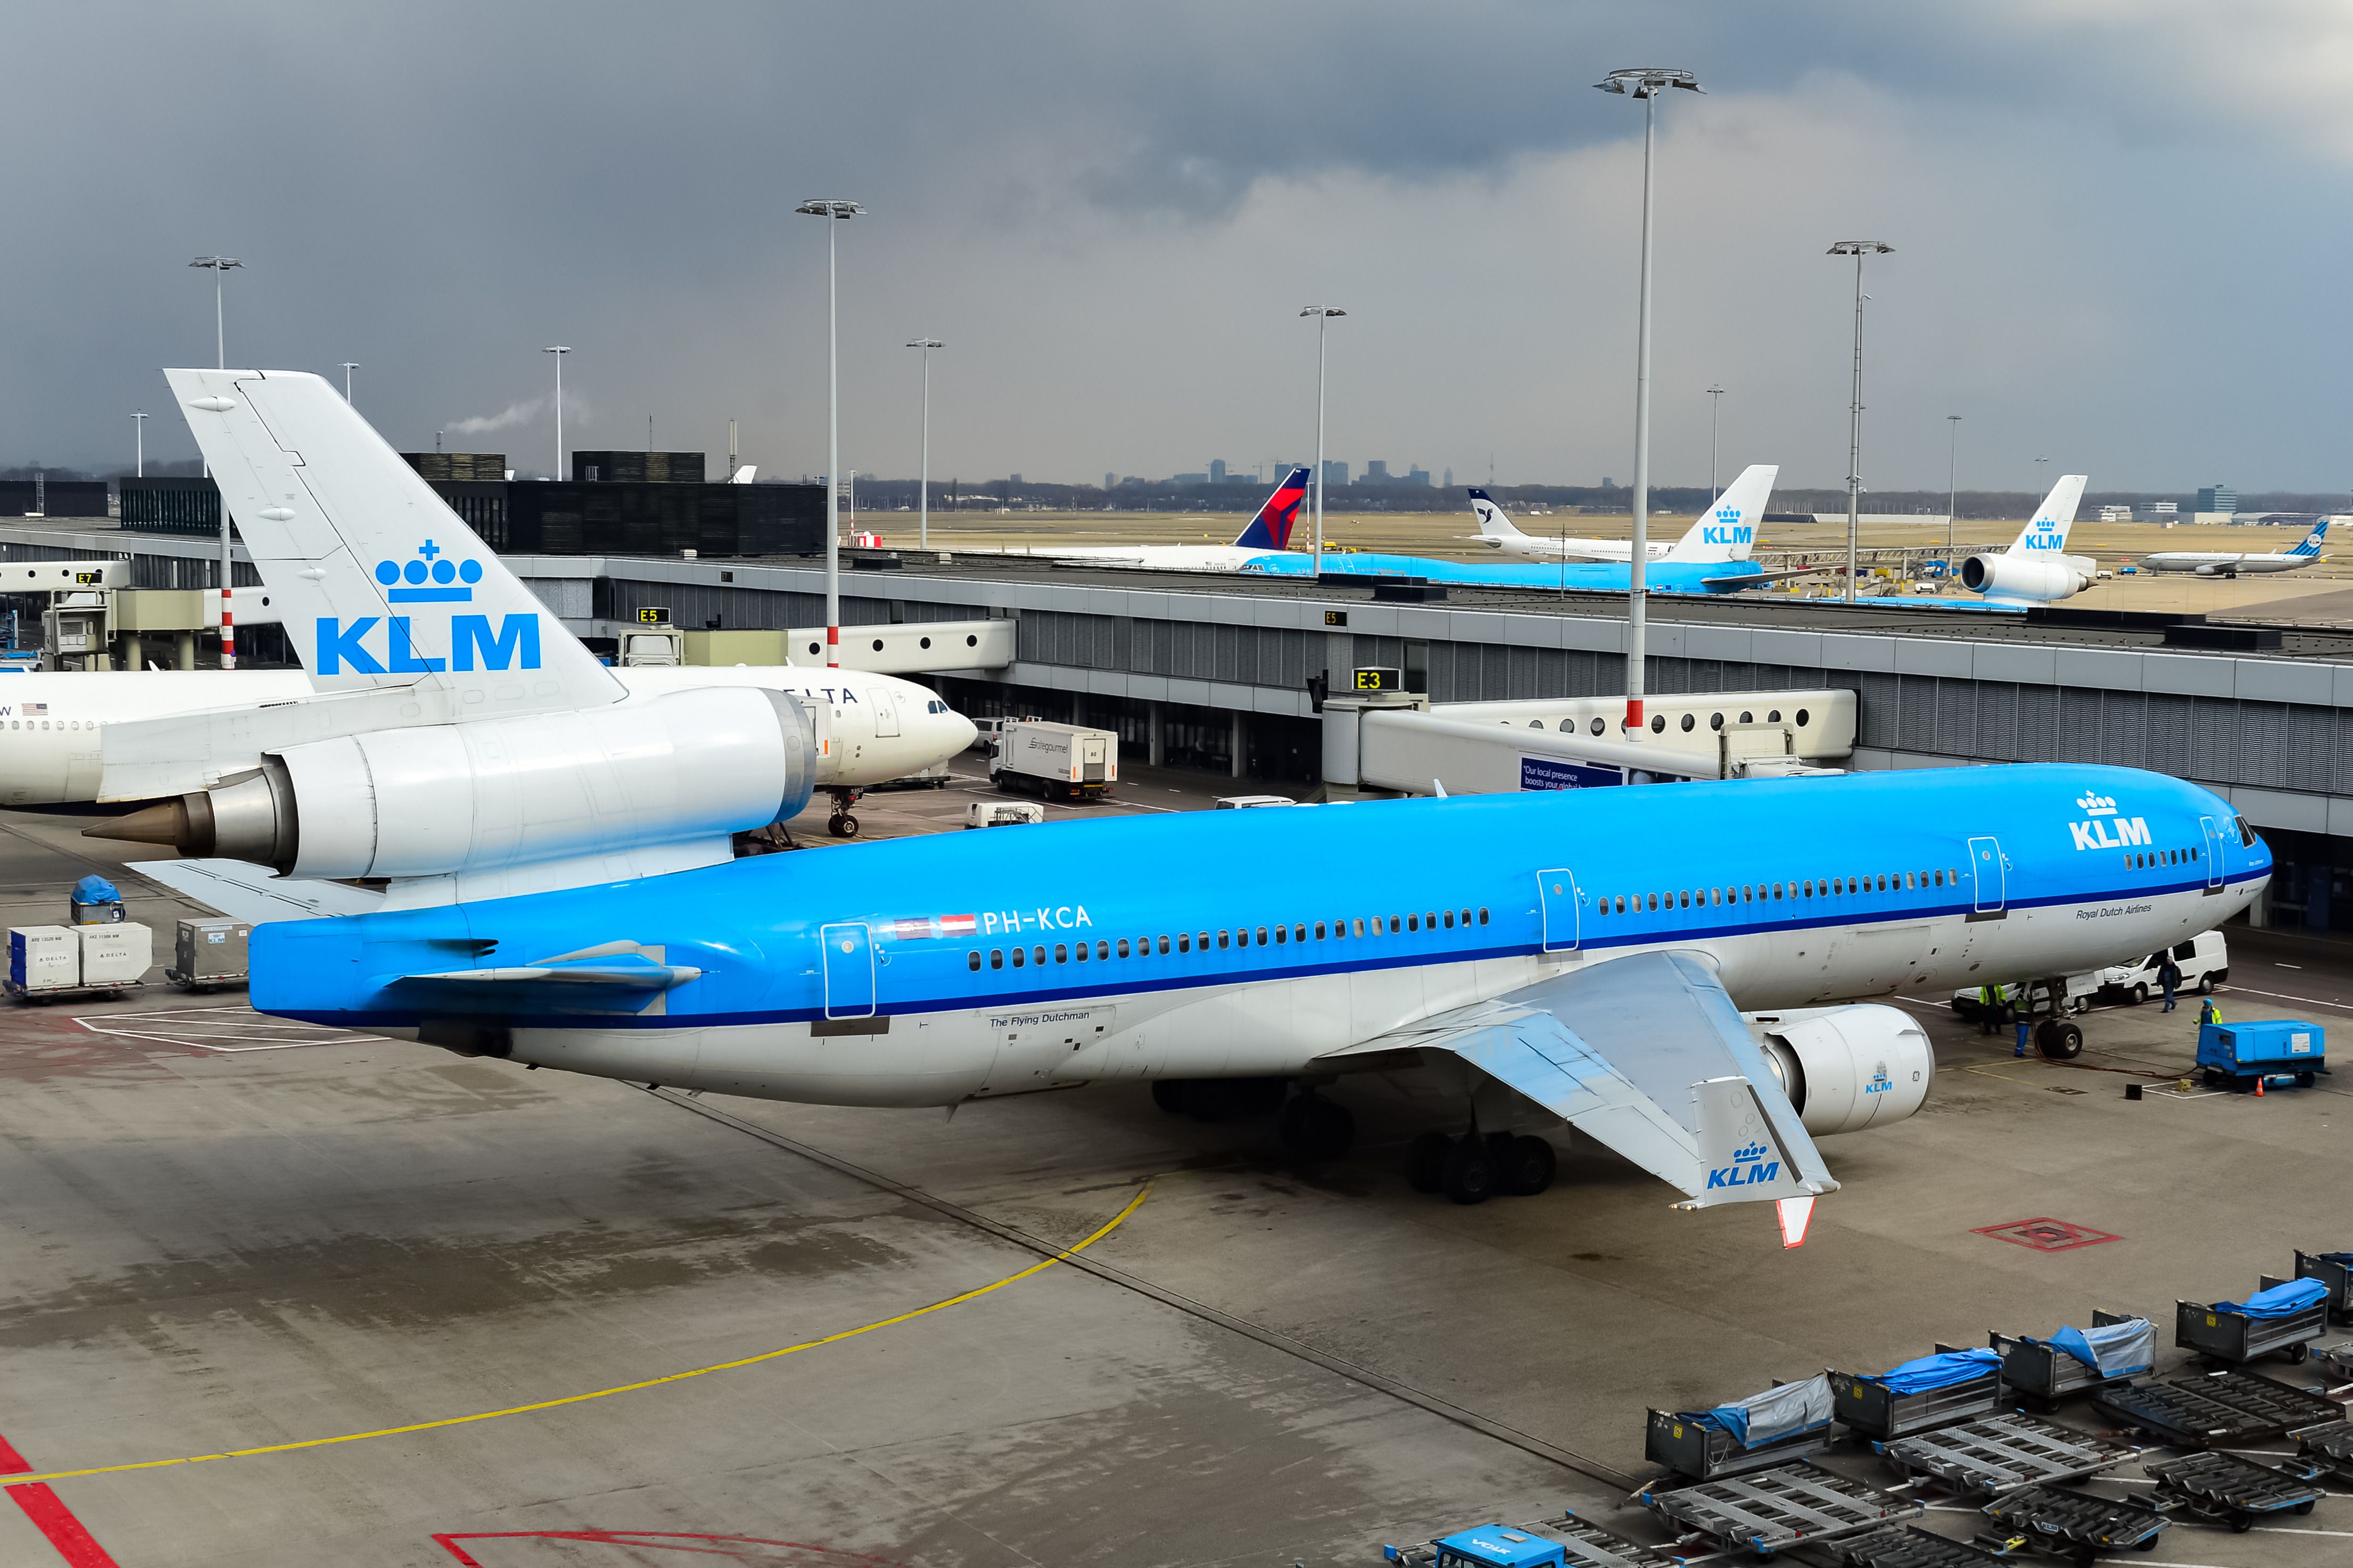 A KLM MD-11 parked at Amsterdam Schiphol Airport.